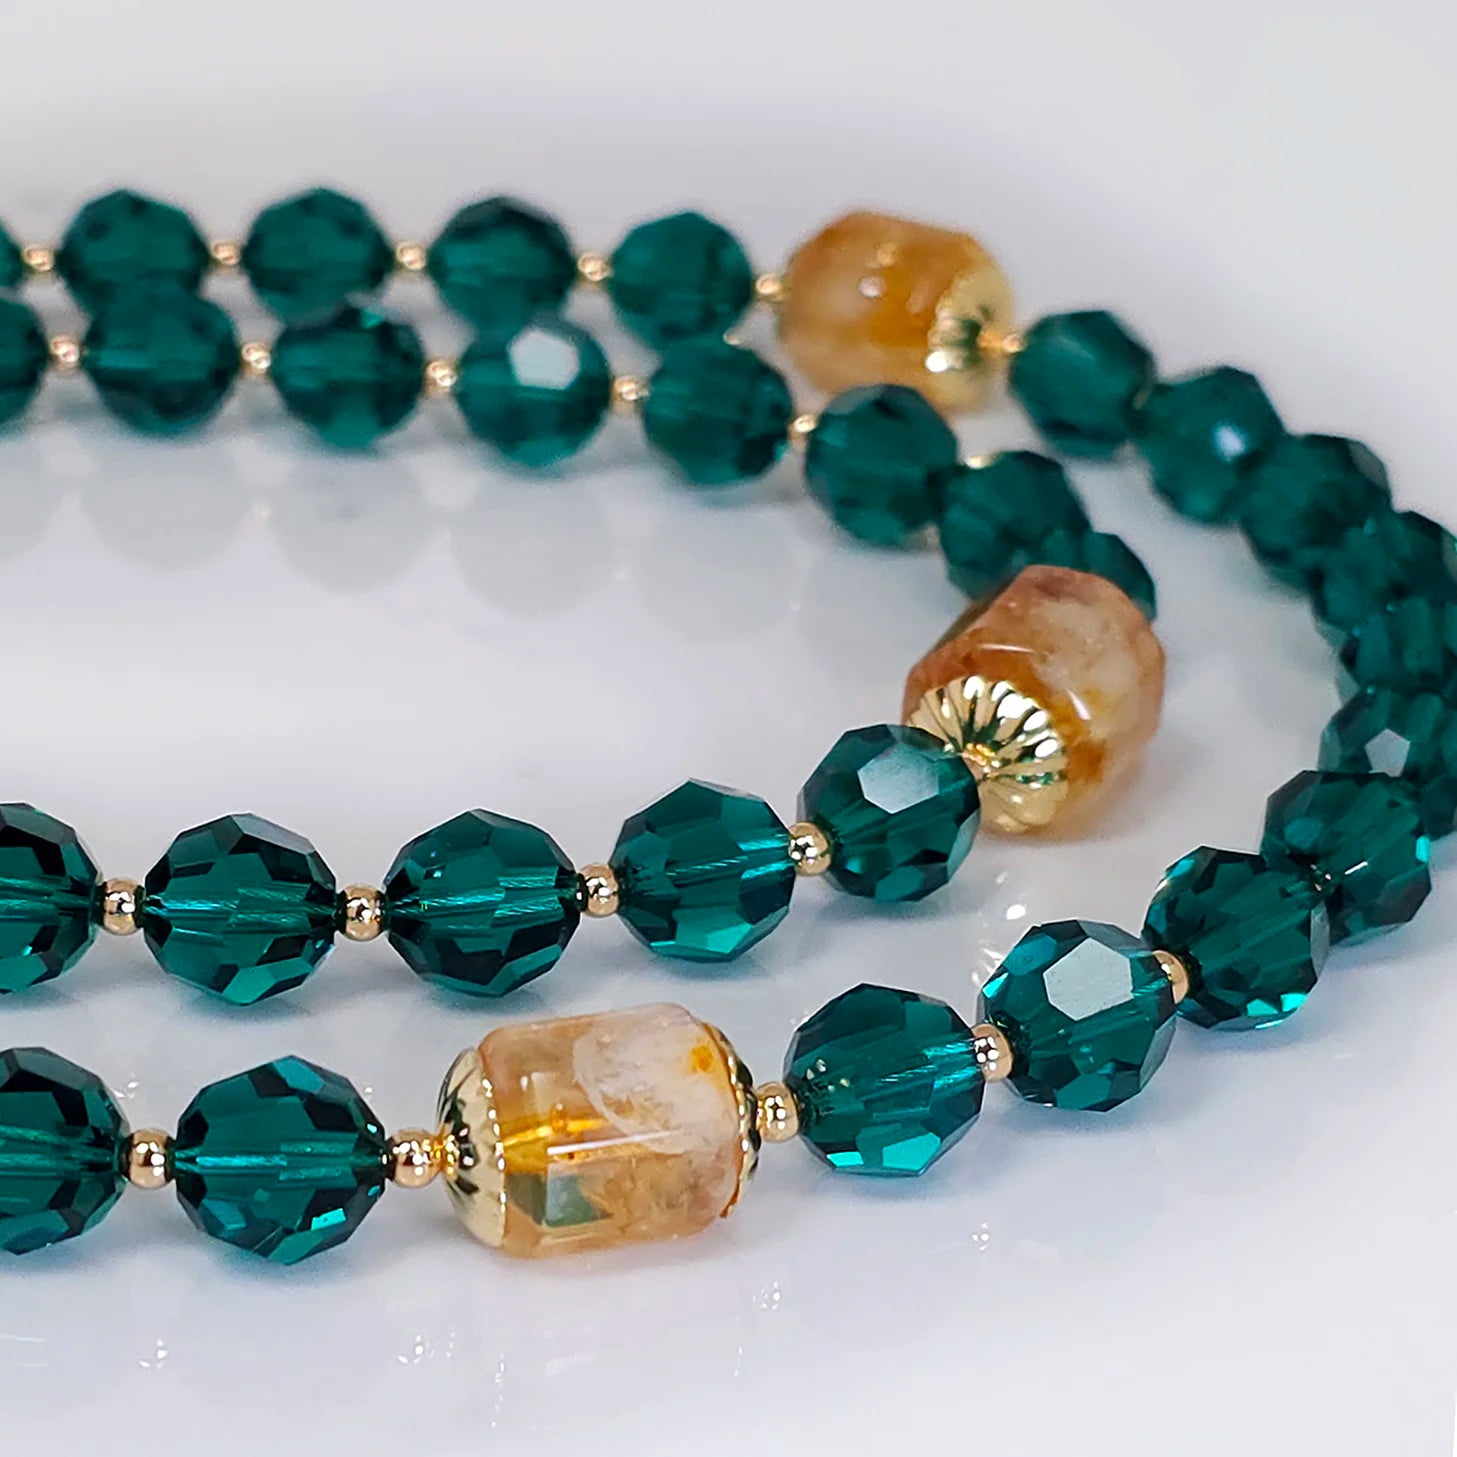 A close-up view of emerald rosary beads with Swarovski crystals, elegantly laid on a white table.